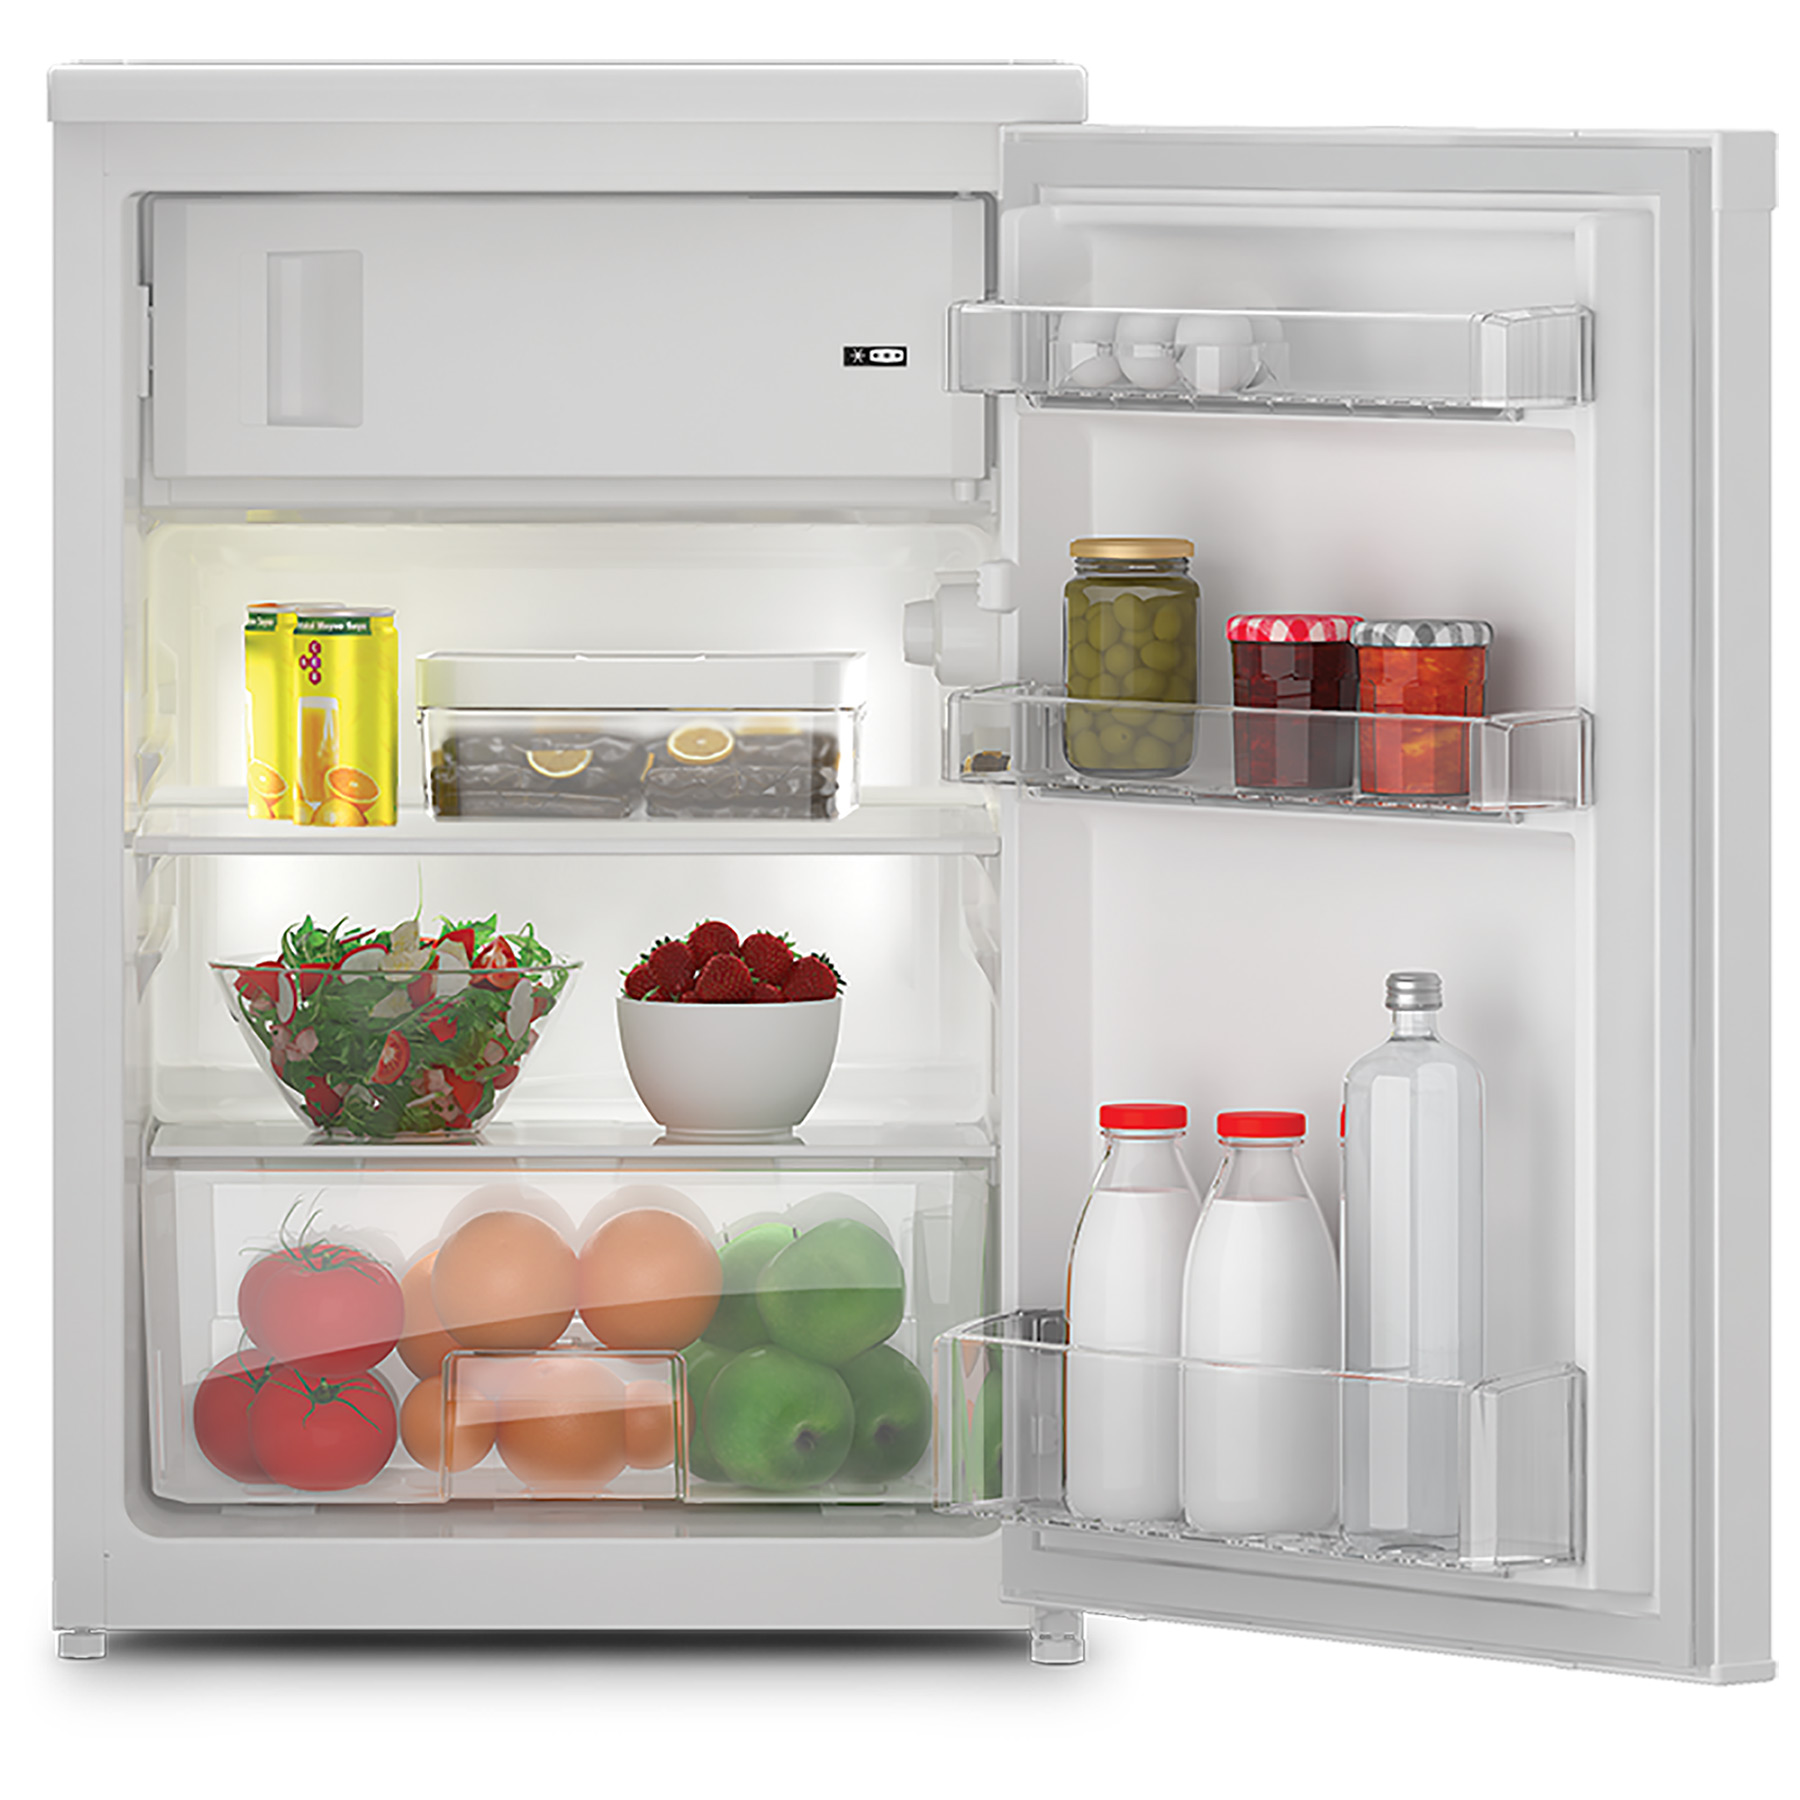 Image of Zenith ZRS4584W 55cm Undercounter Fridge in White E Rated Icebox 101L